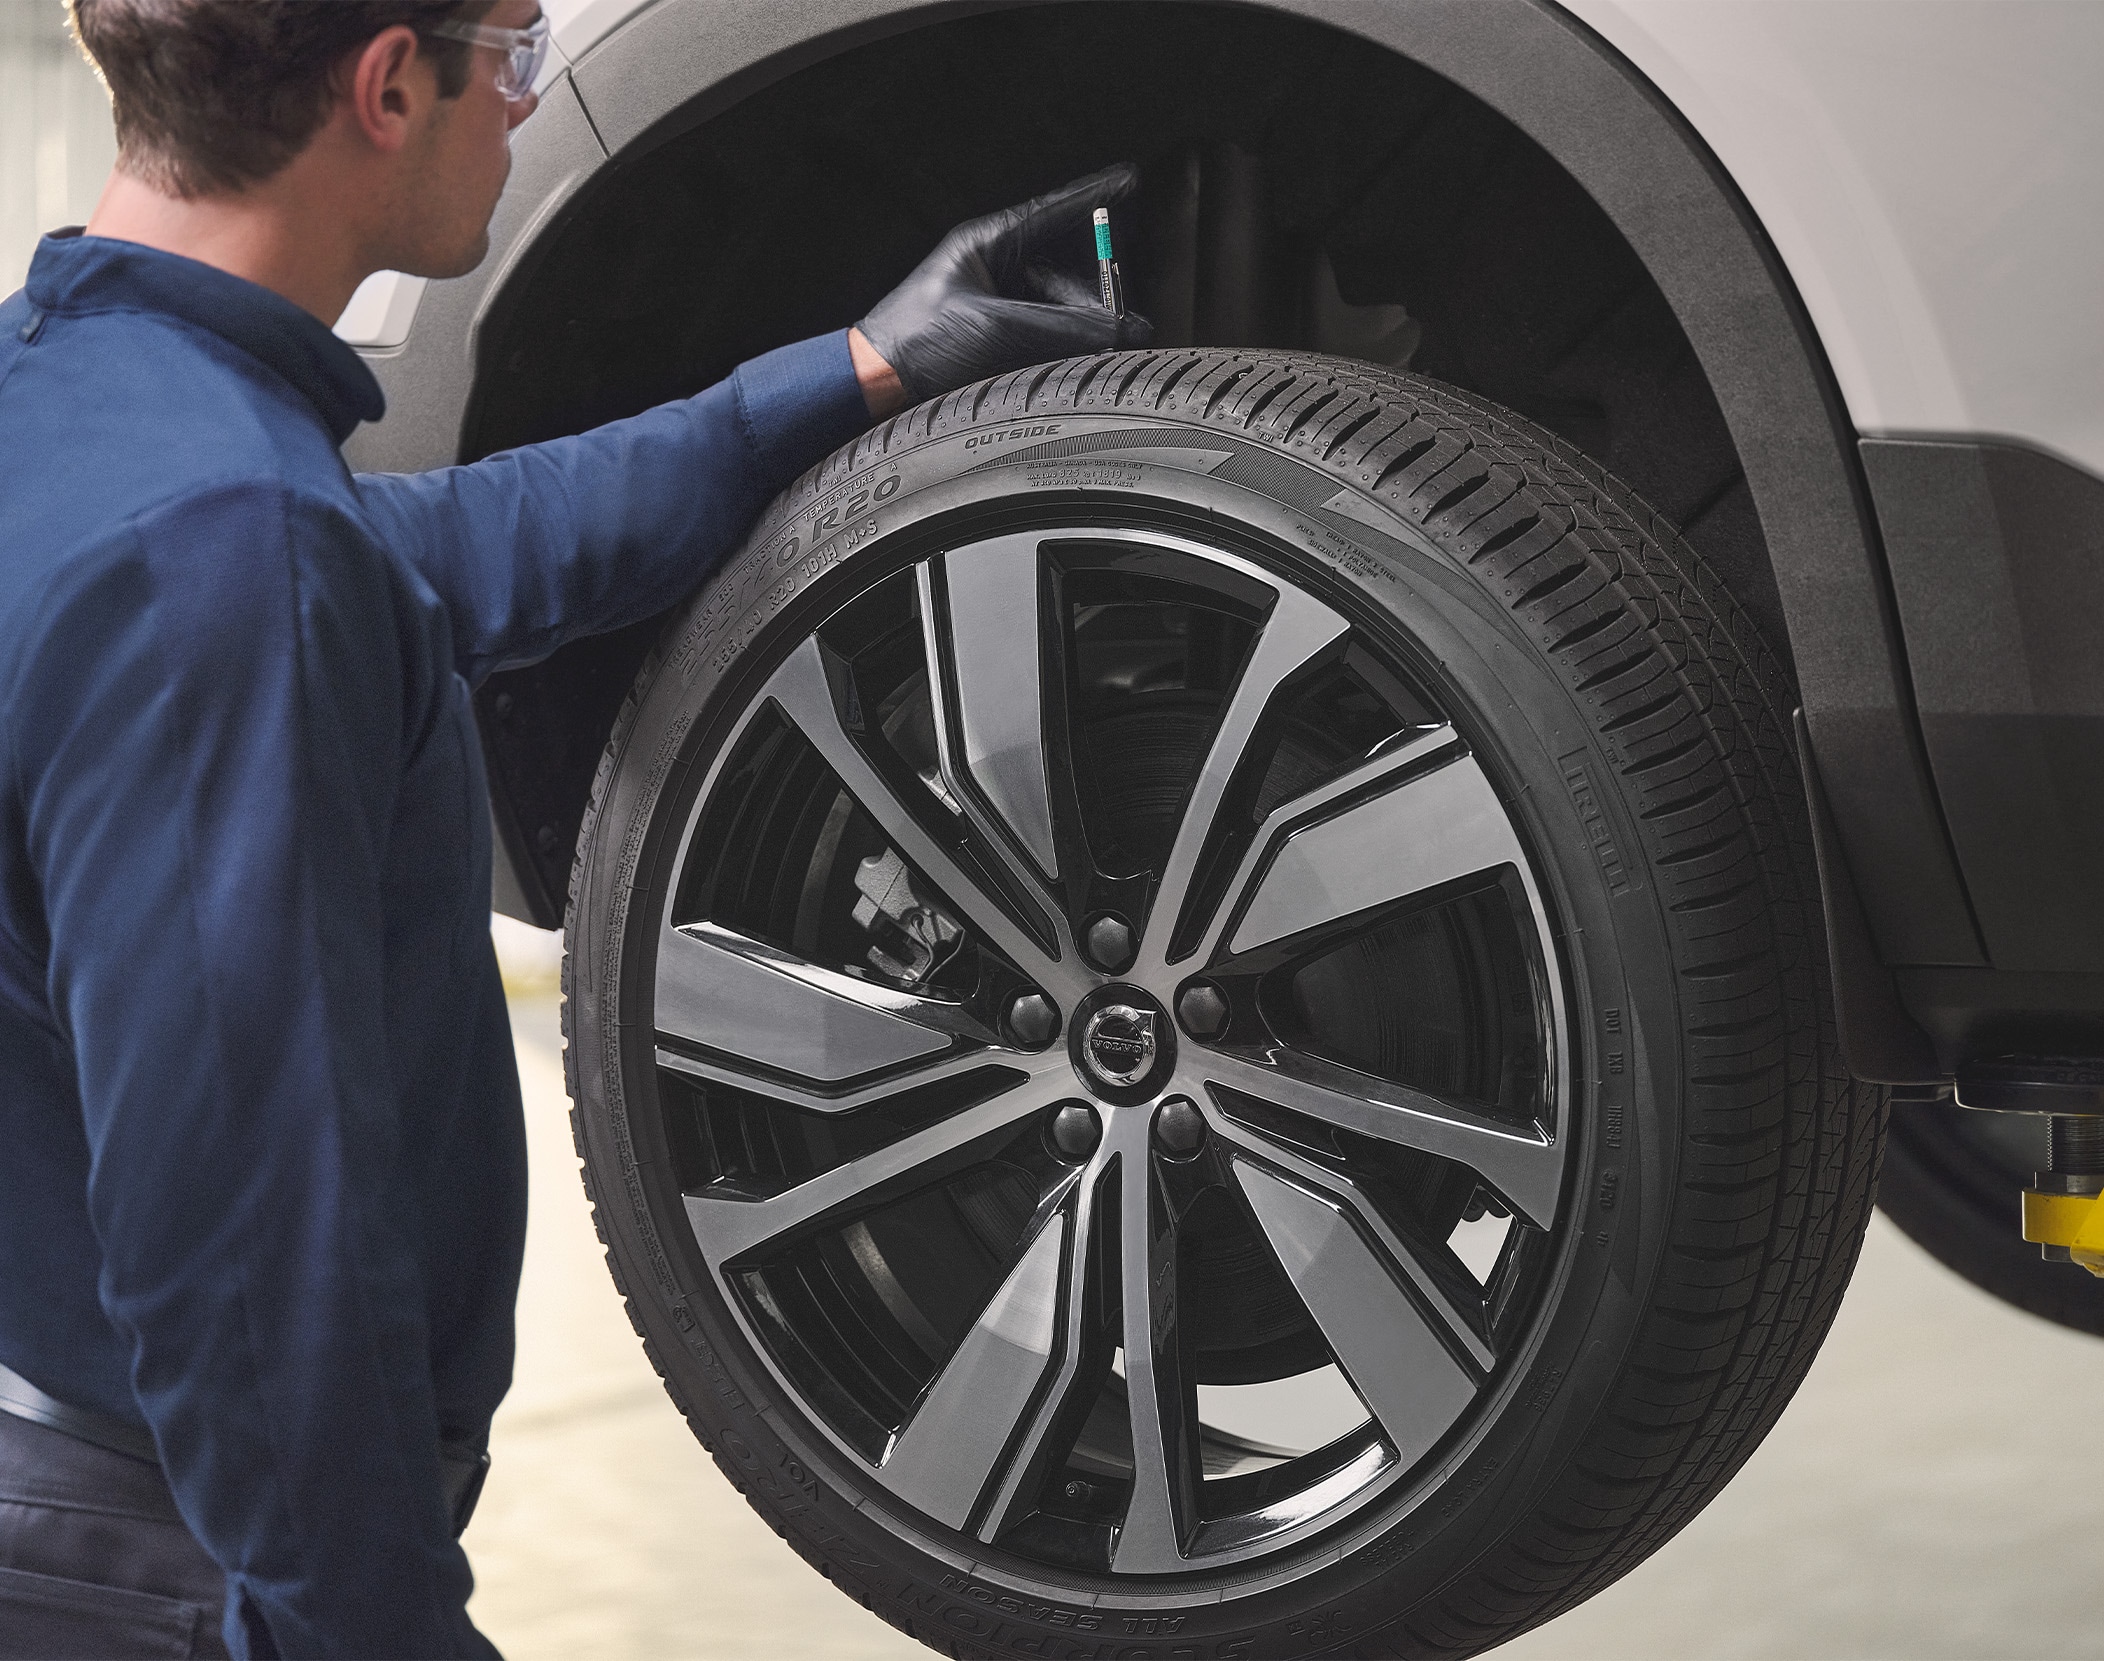 The Best Tires for a Volvo - Mechanic checking tire on a car